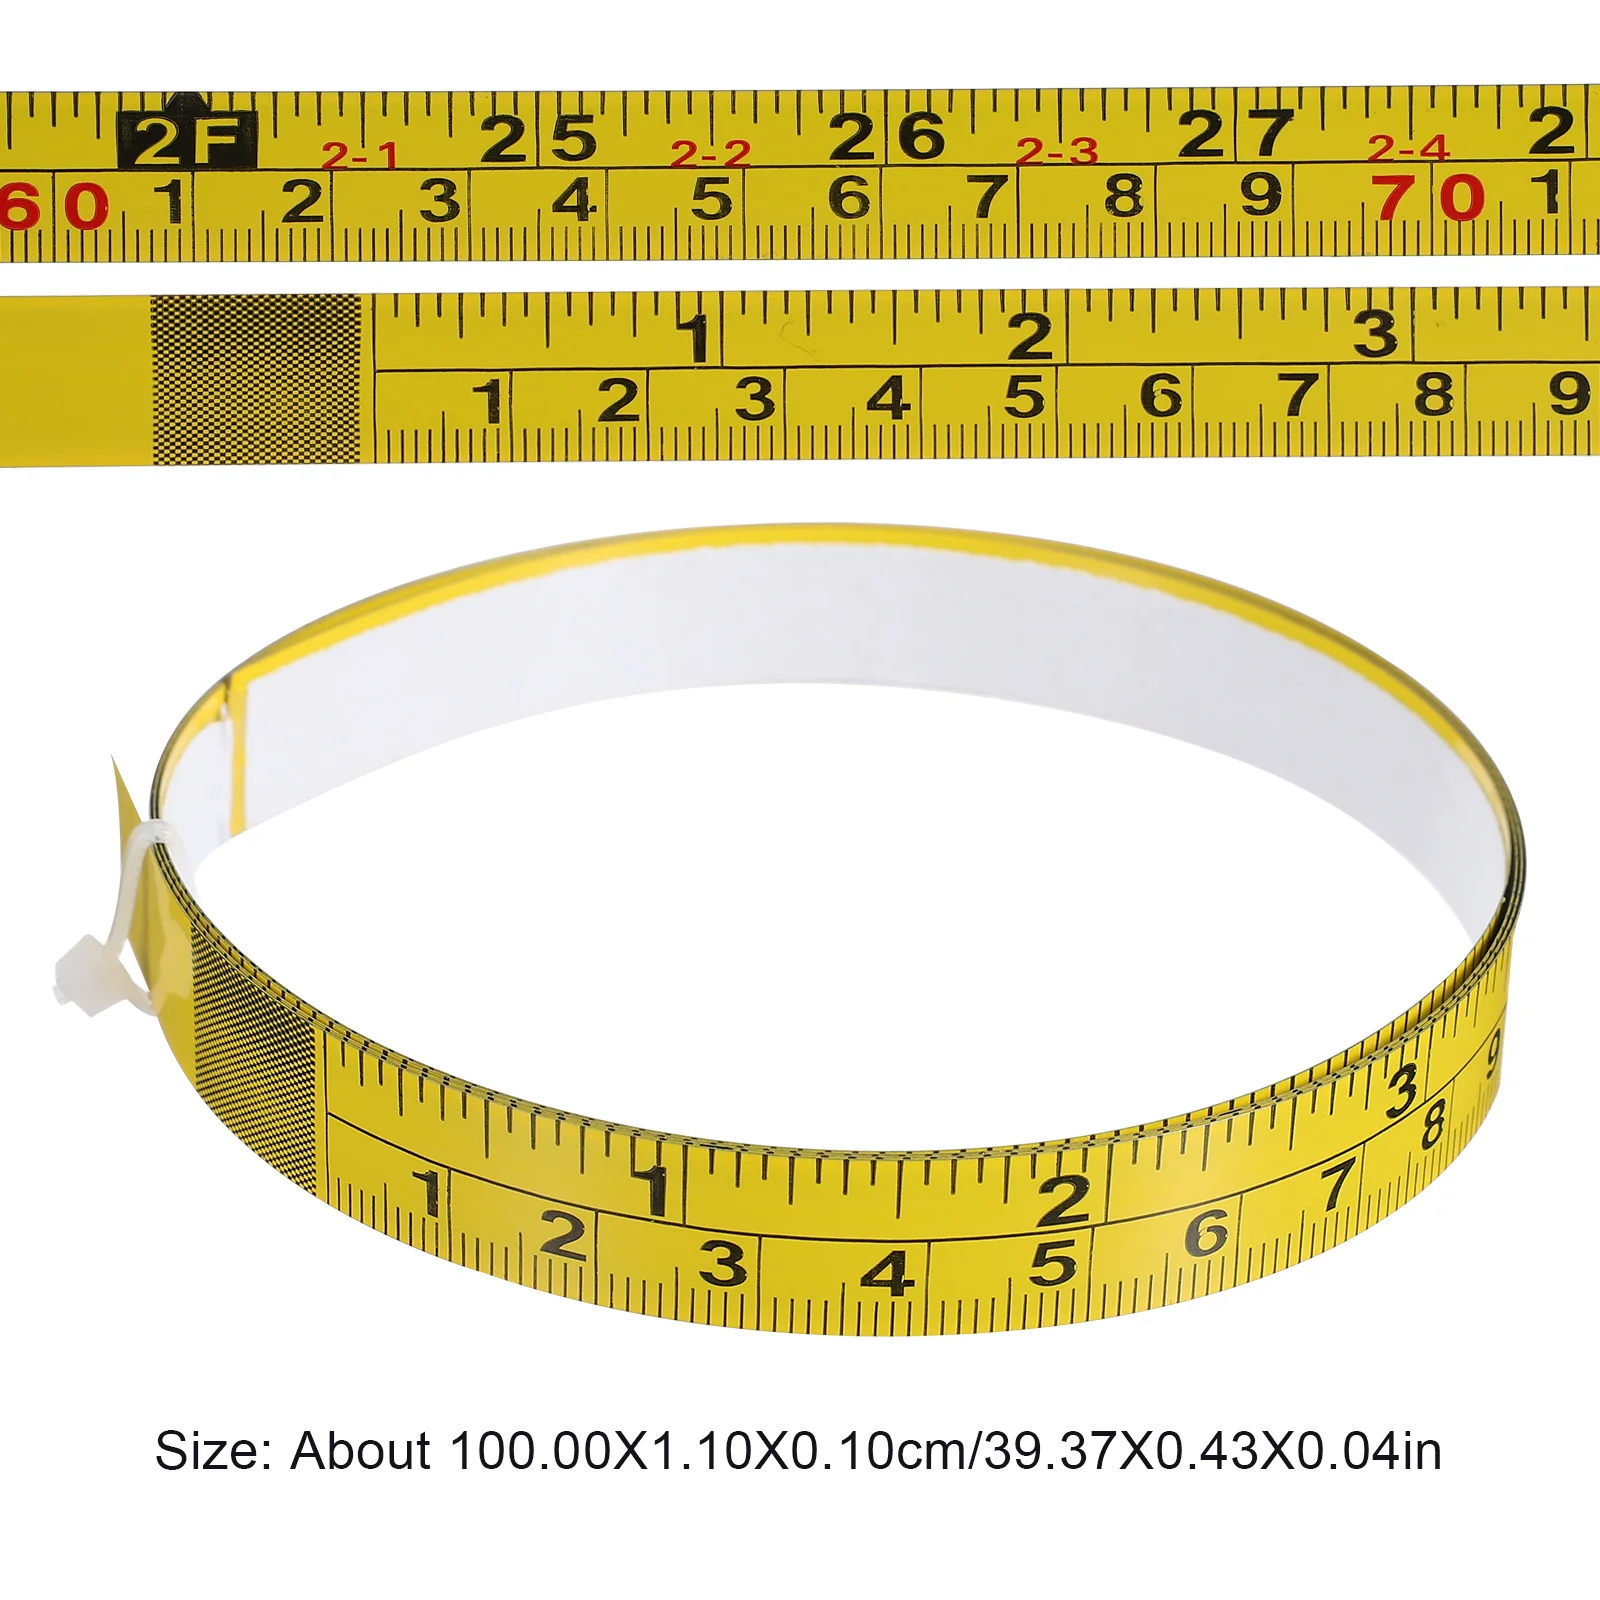 

3 Pcs Self-Adhesive Measuring Tapes Imperial and Metric Scales Workbench Rulers Sticky Measure Tapes with Adhesive Backing